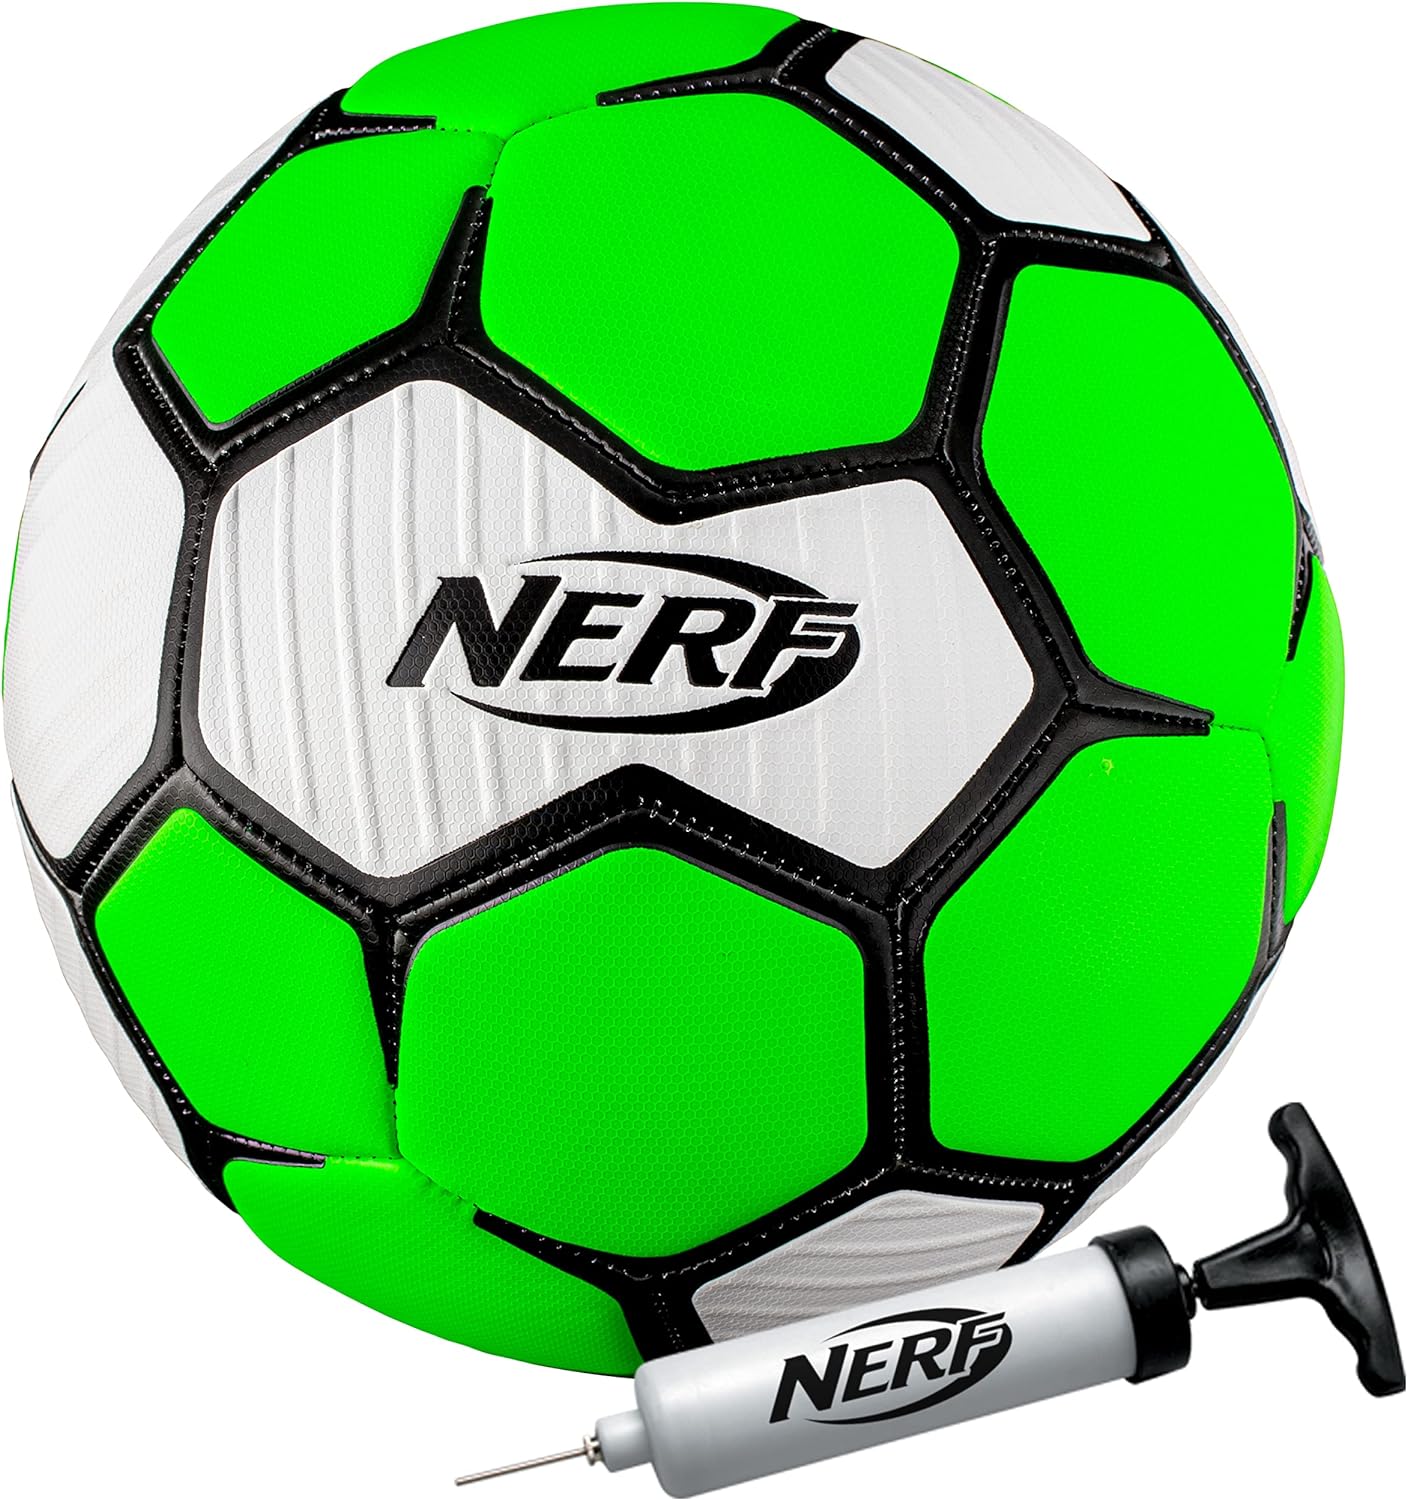 Not as soft as we thought, but nonetheless great for solo skill juggling indoors. Great product by Nerf!